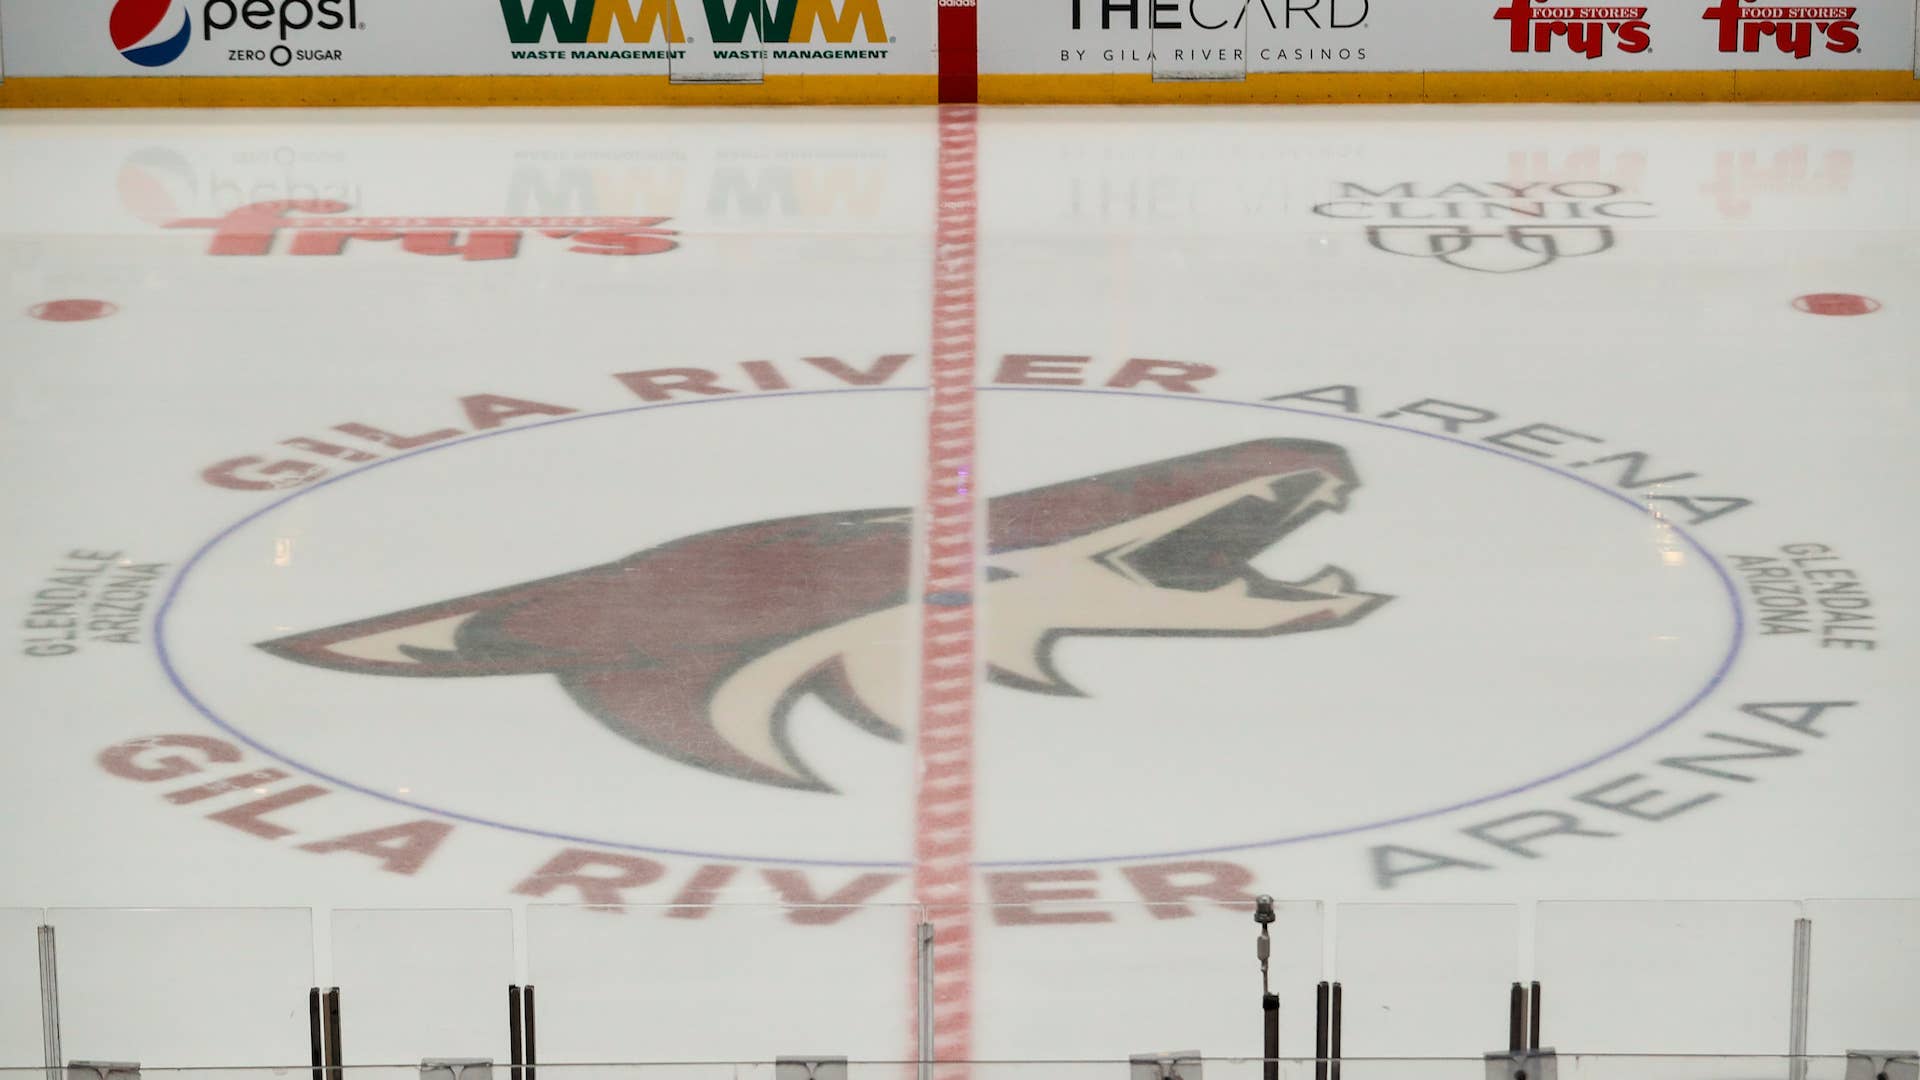 The Coyotes logo on the ice during the NHL hockey game against the Chicago Blackhawks.